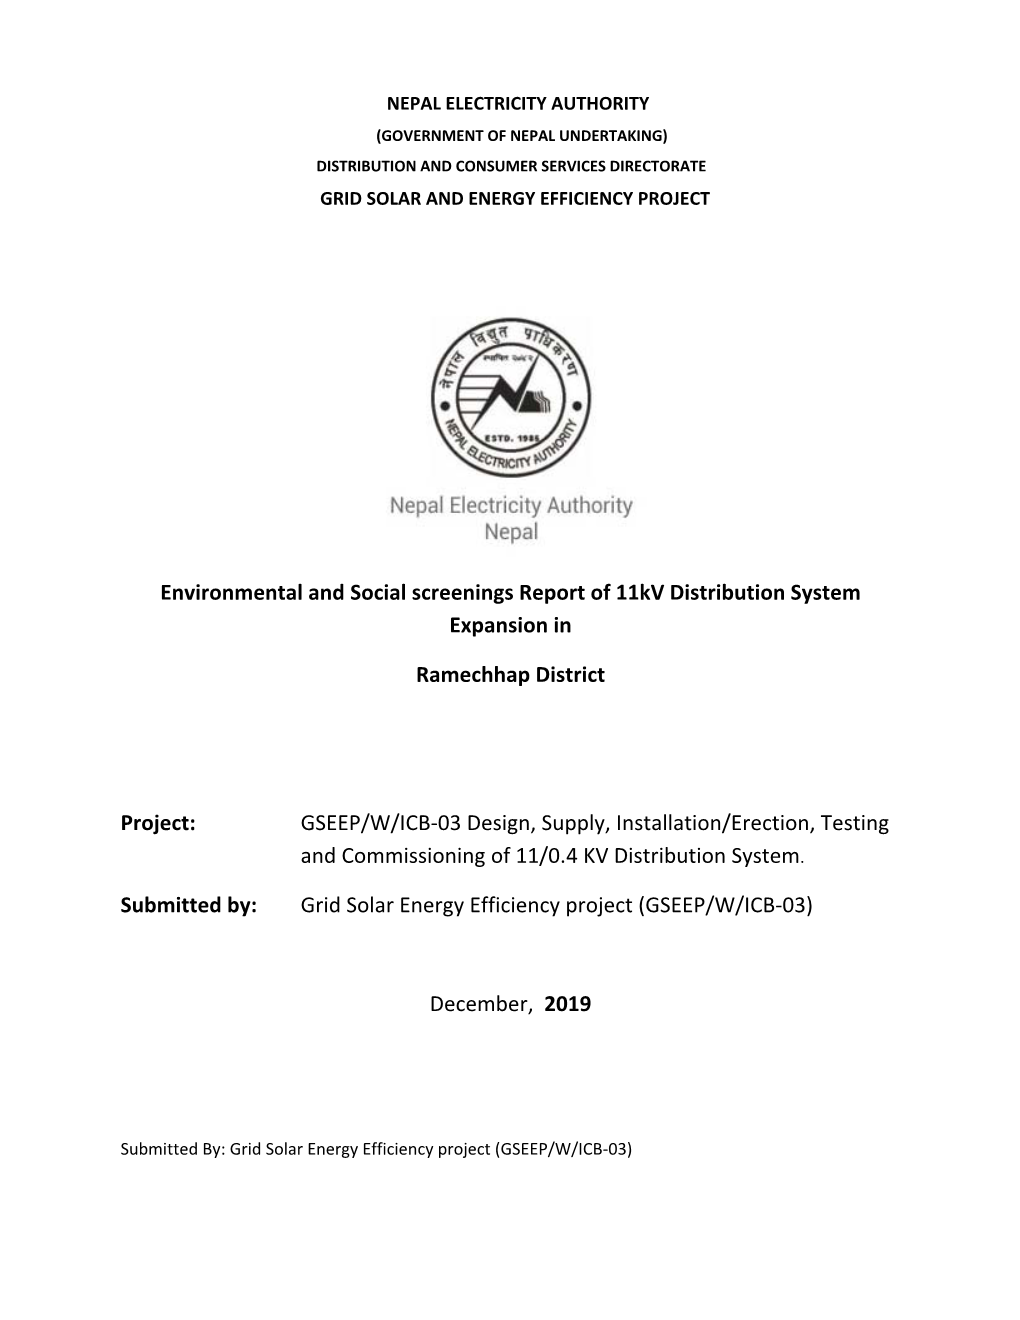 Environmental and Social Screenings Report of 11Kv Distribution System Expansion In